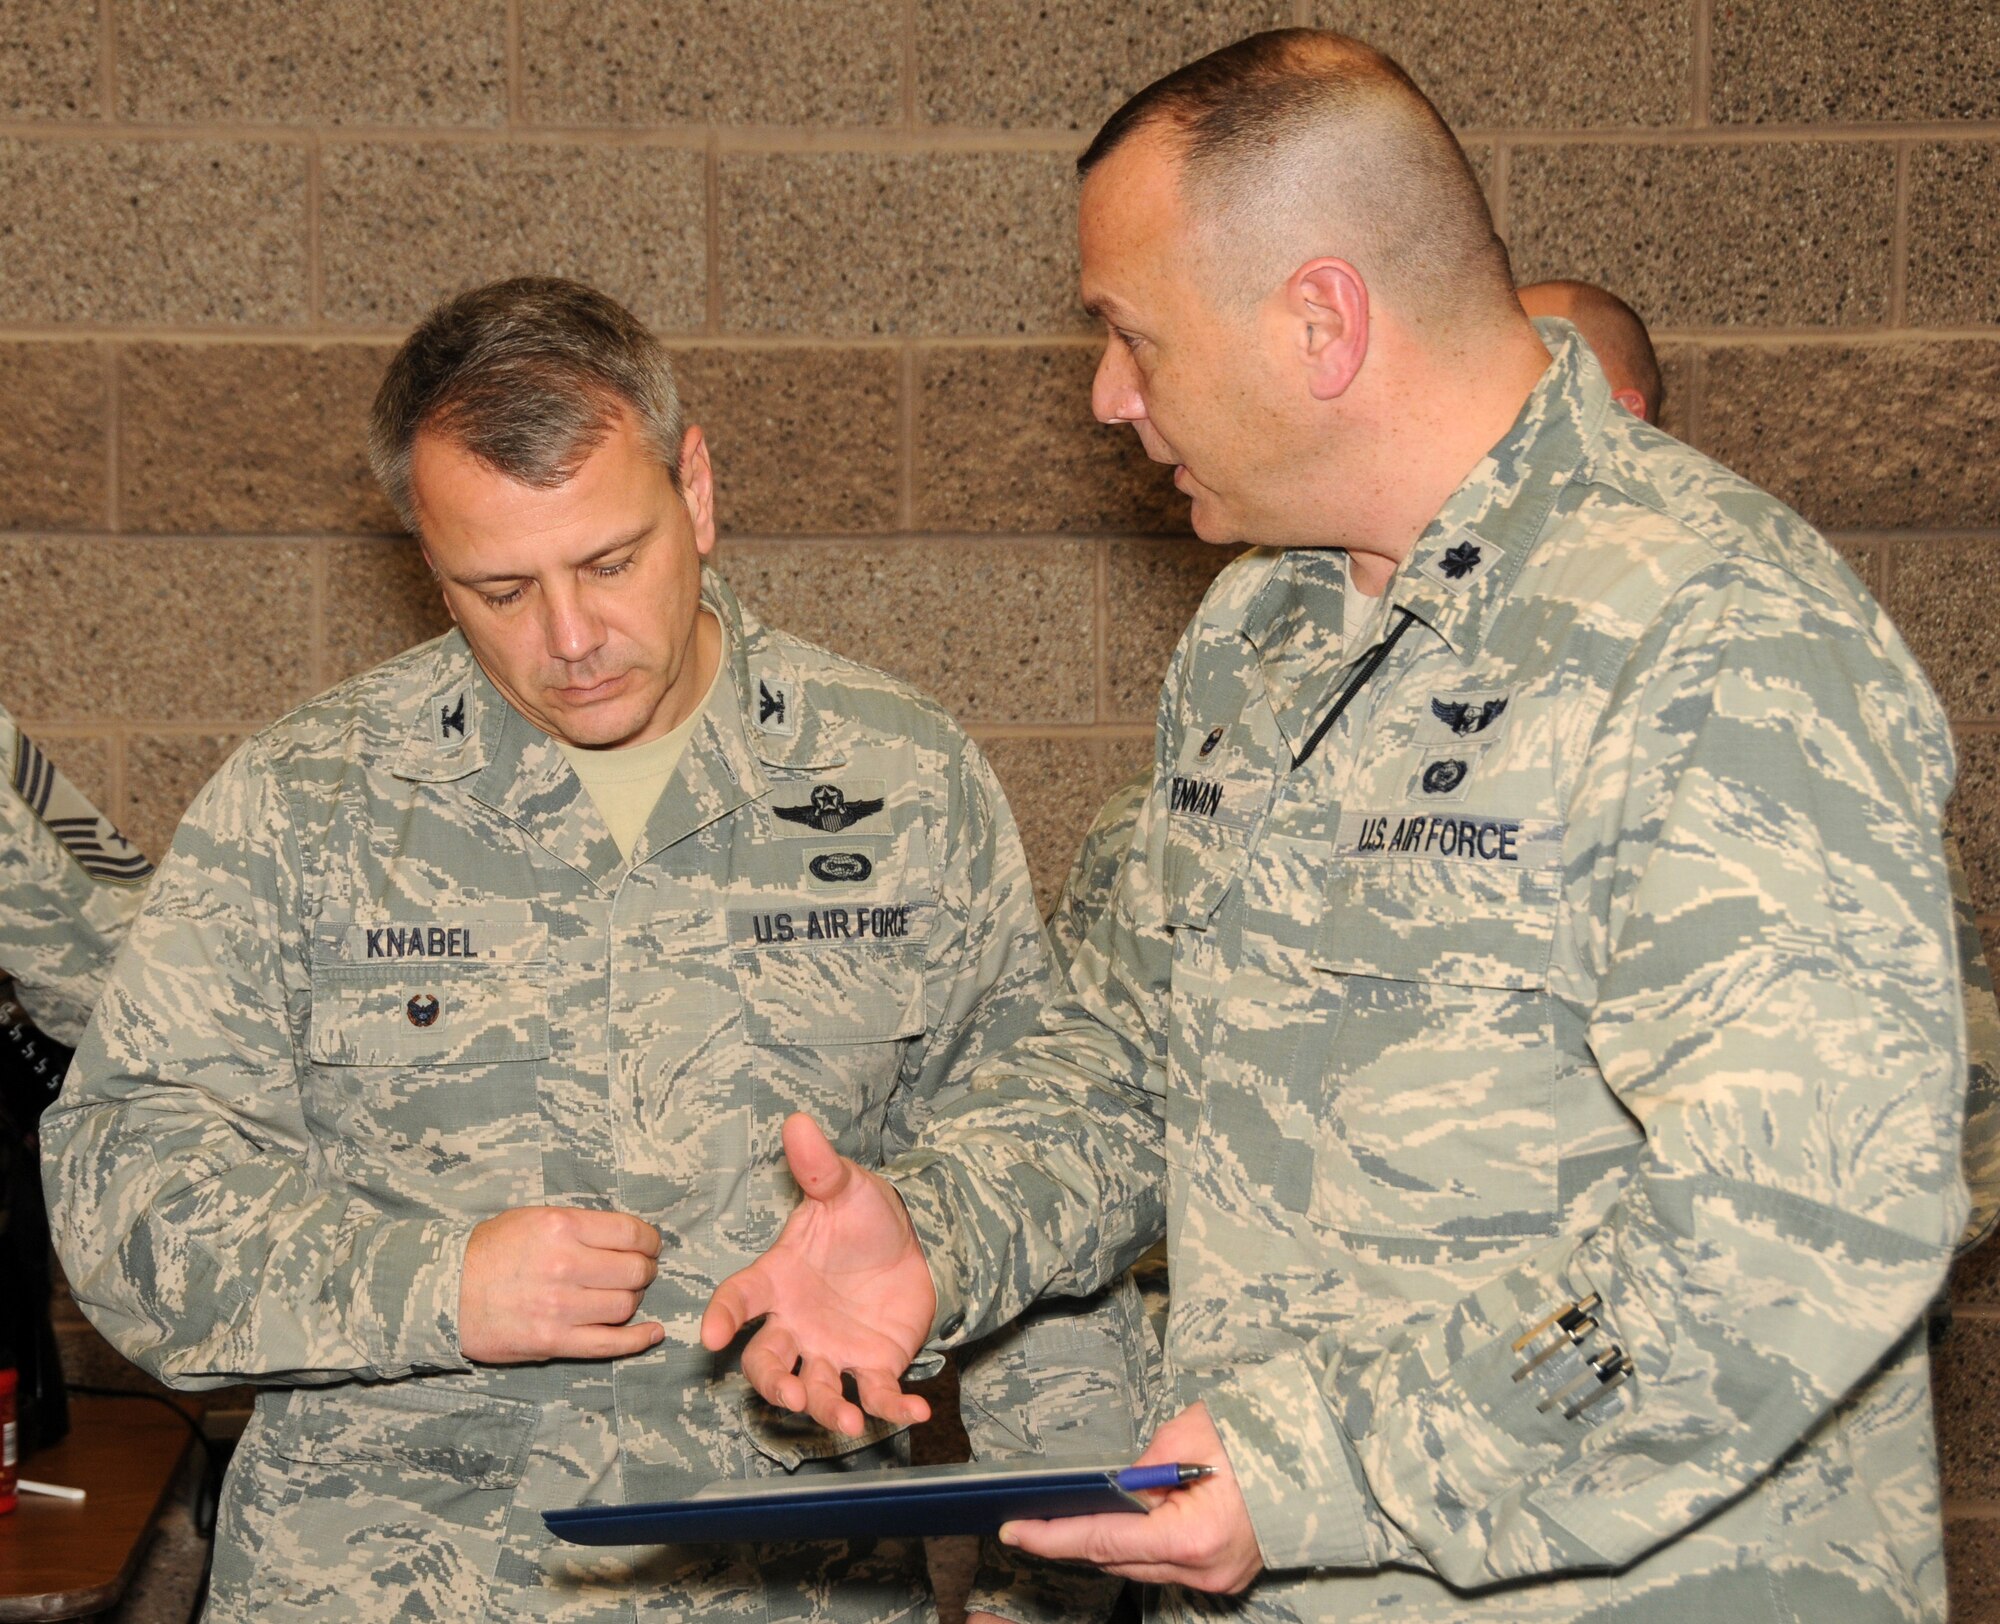 Lt. Col. Troy Drennan, 169th Intelligence Squadron Commander, brainstorms with 
Col. John Knabel, Chief, Intelligence, Surveillance, Reconnaissance Forces 
Division, Air National Guard, National Guard Bureau, during a break between 
sessions at the Weapons Systems Council Conference held at Roland R. Wright 
Air National Guard Base February 2-3. More than two dozen members of the 
intelligence community gathered from across the nation to discuss existing and 
emerging issues. (Air National Guard photo by Capt. Jennifer Eaton/RELEASED)